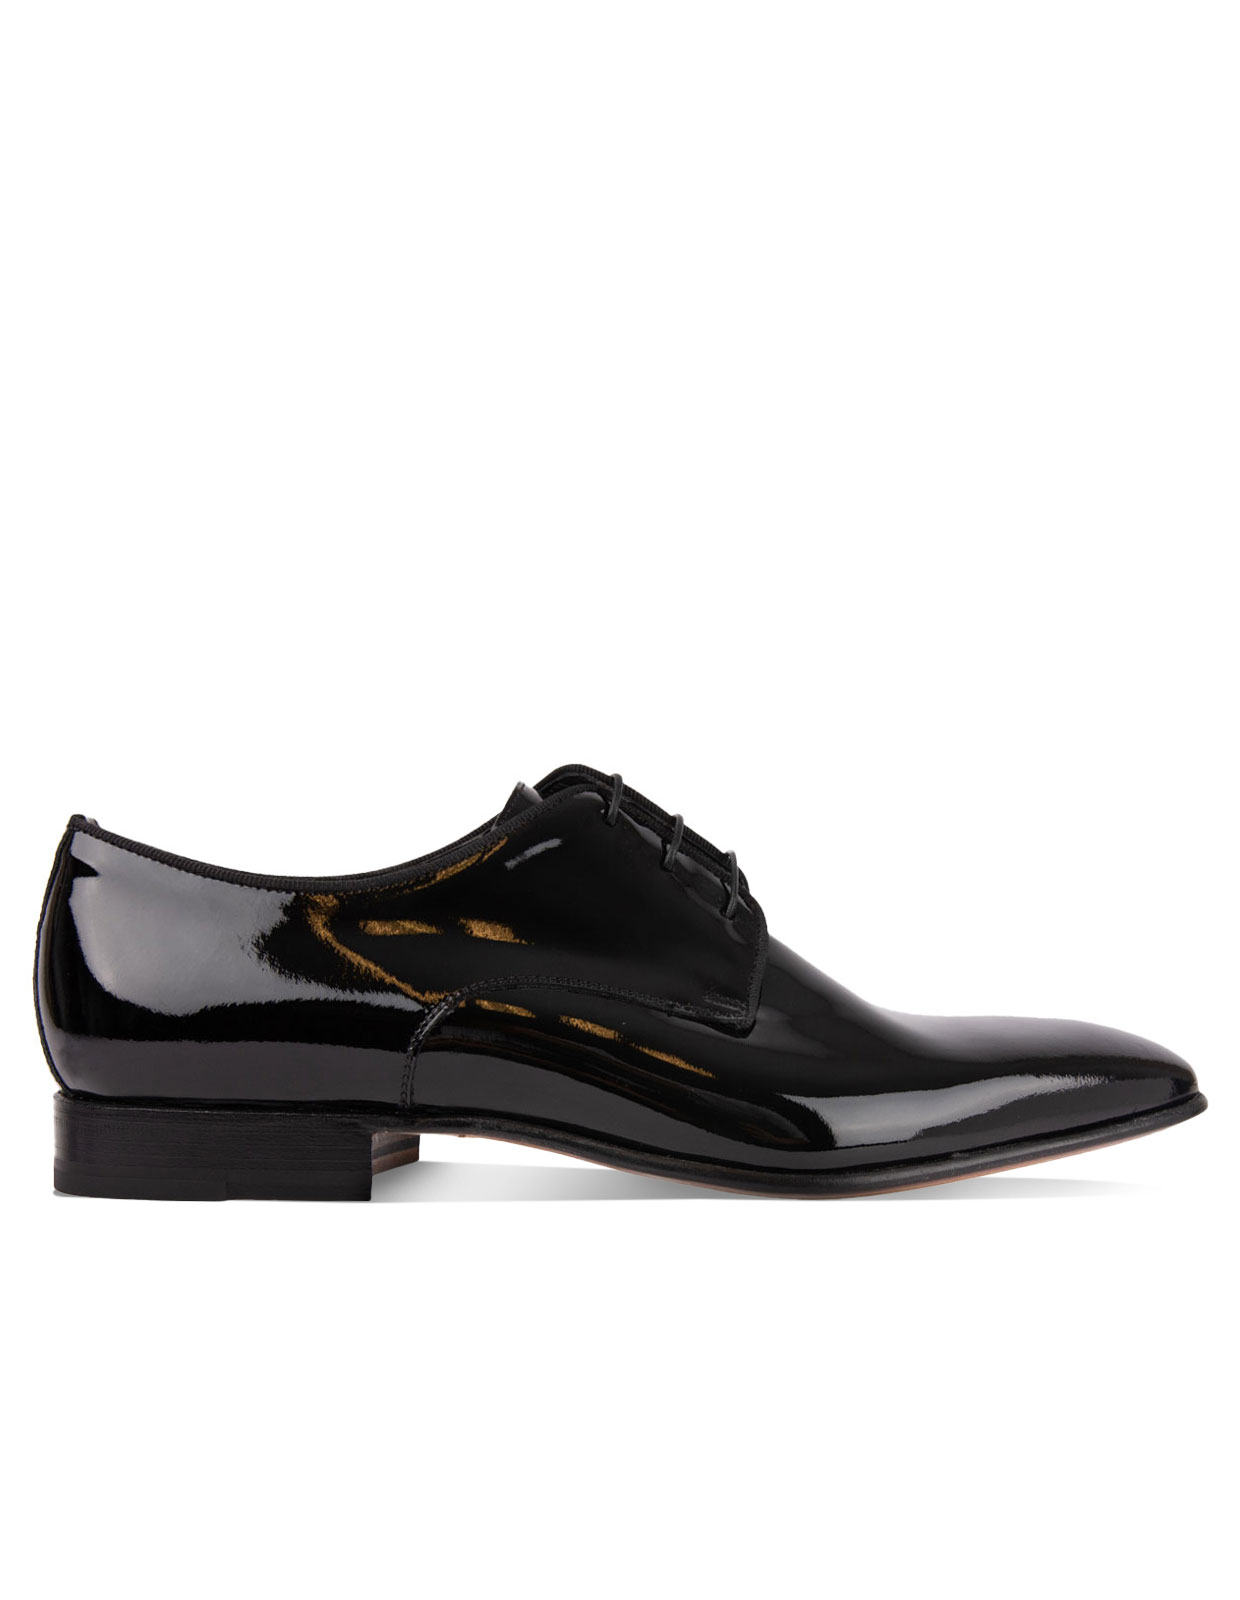 Lille Patent Leather Derby Shoes Black Stl 6